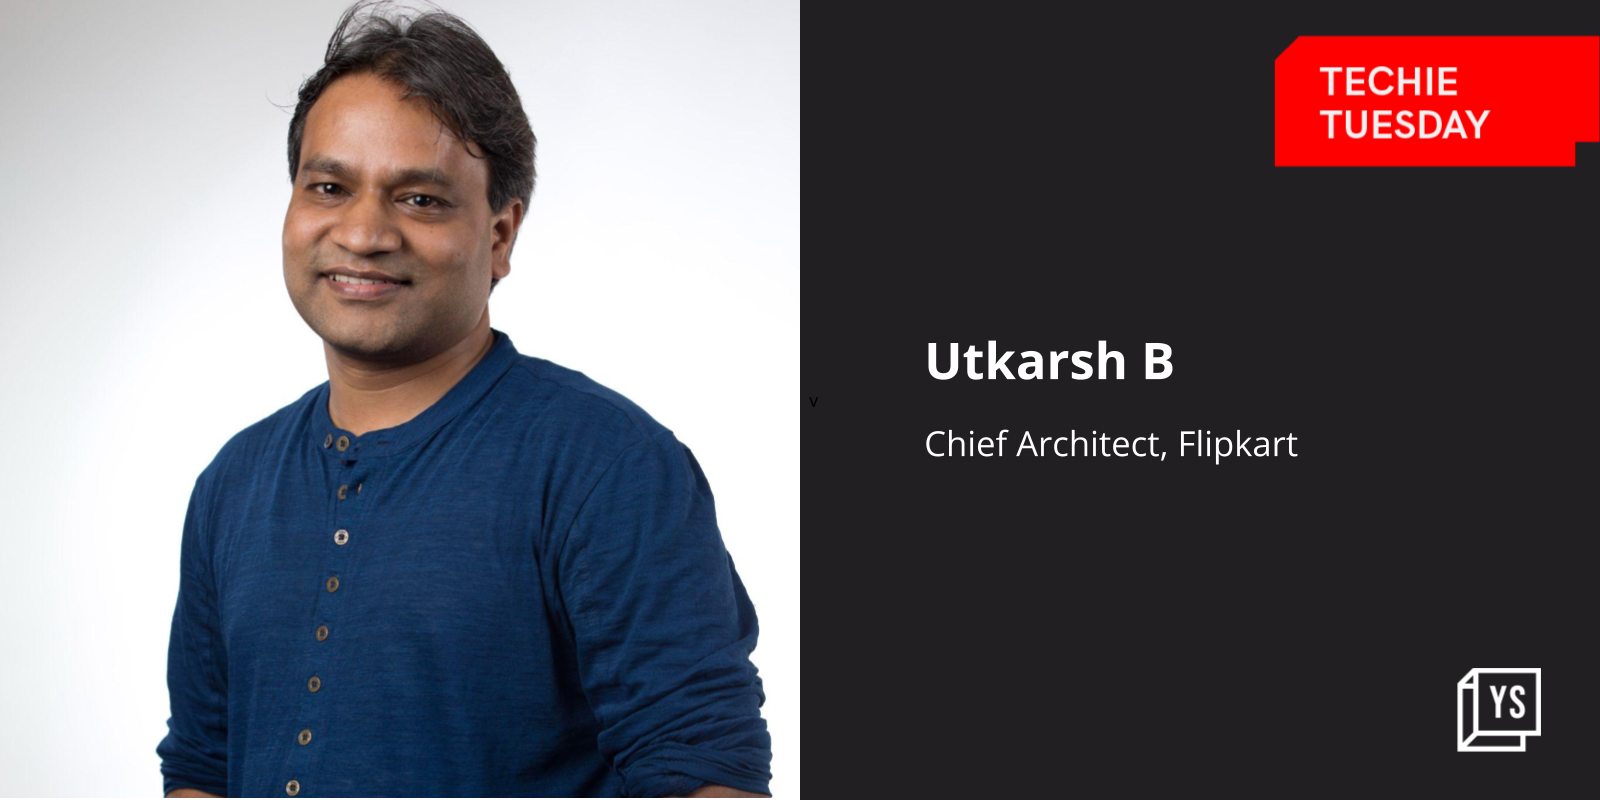 Flipkart’s first Chief Architect recounts his 12-year journey at the e-retailer